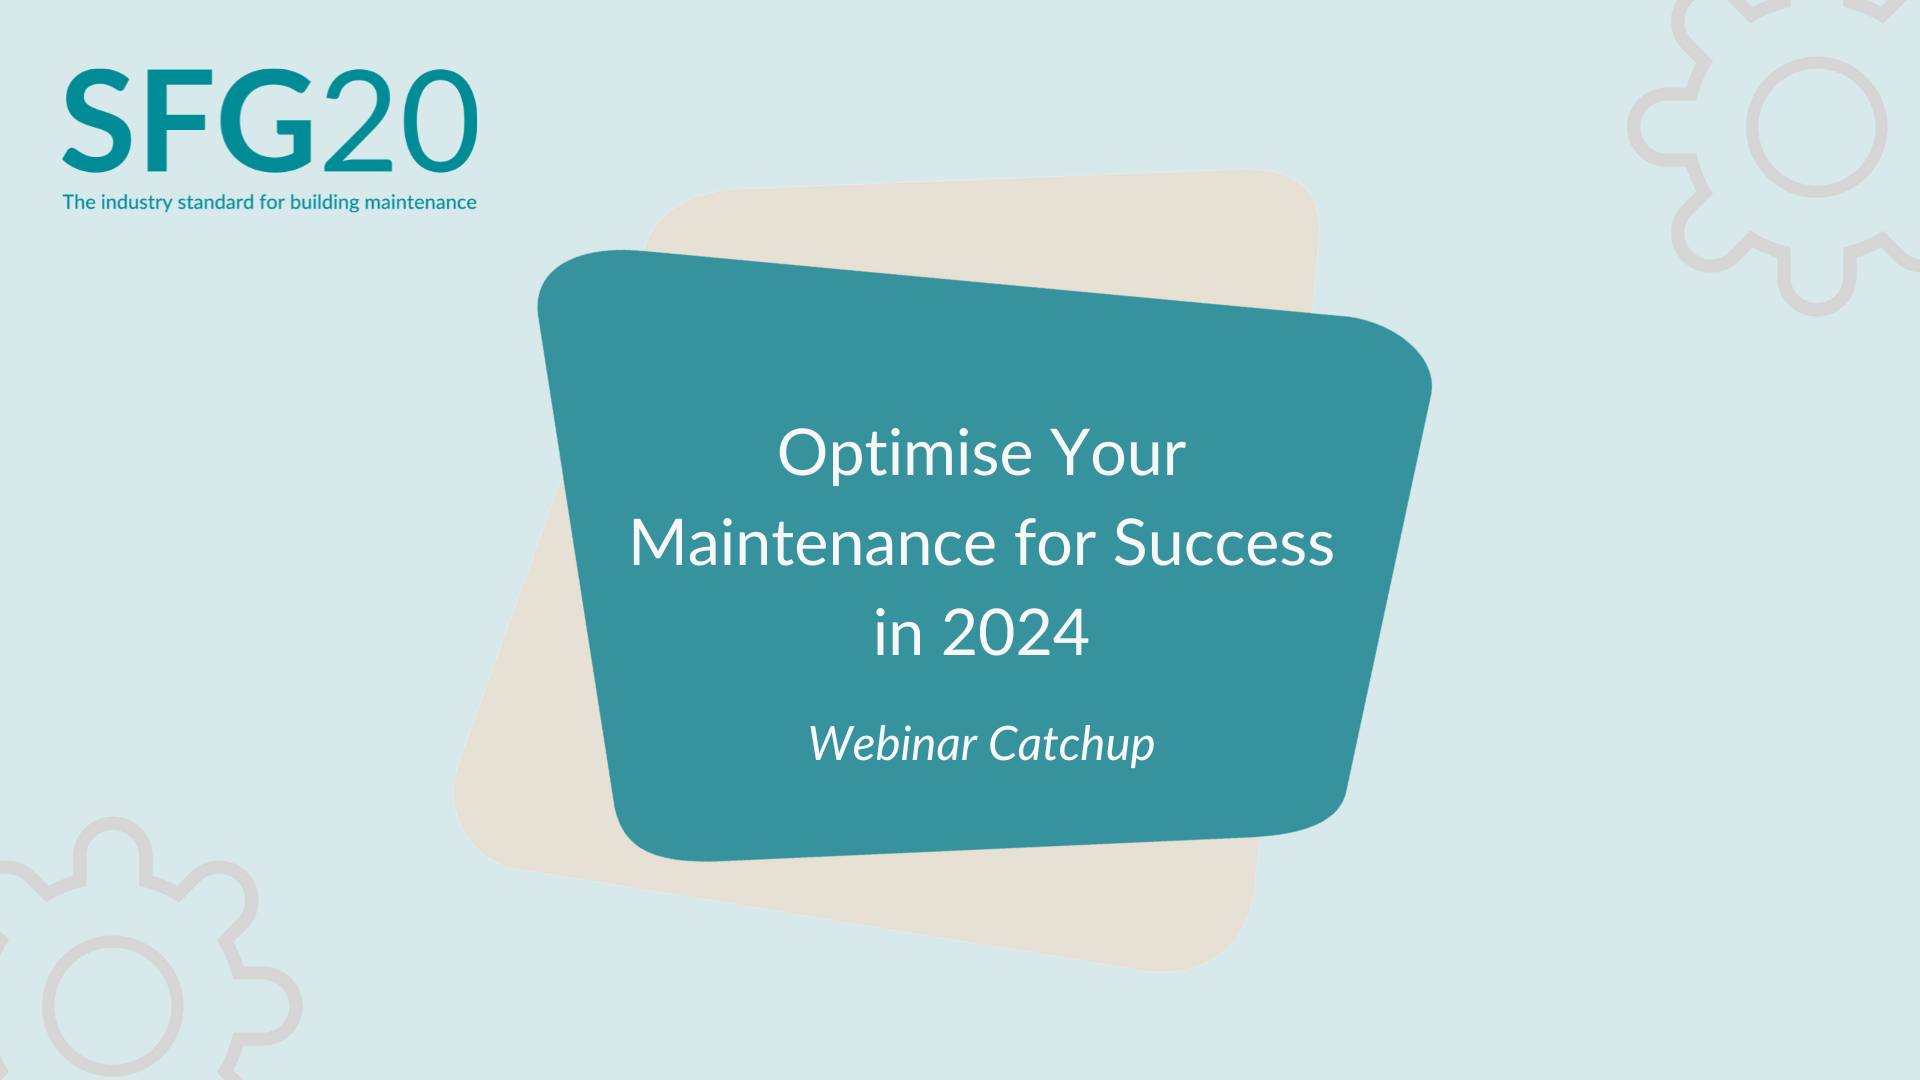 Optimise Your Maintenance for Success in 2024 - after webinar catchup